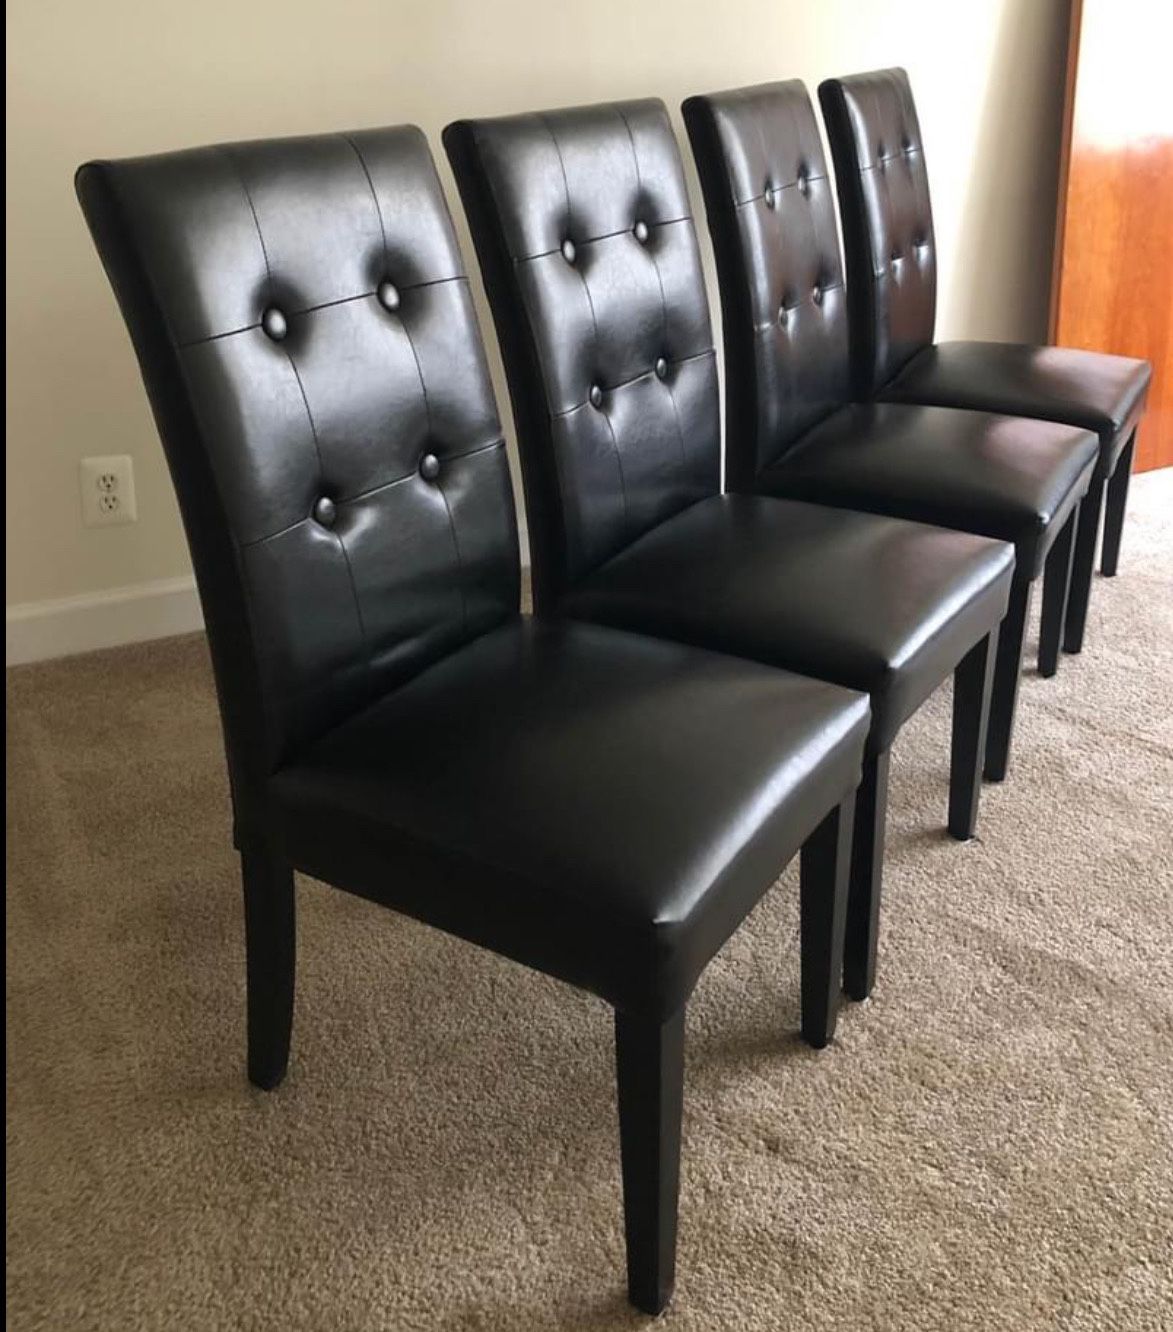 Pier 1 imports 4 black leather chair $350 for all